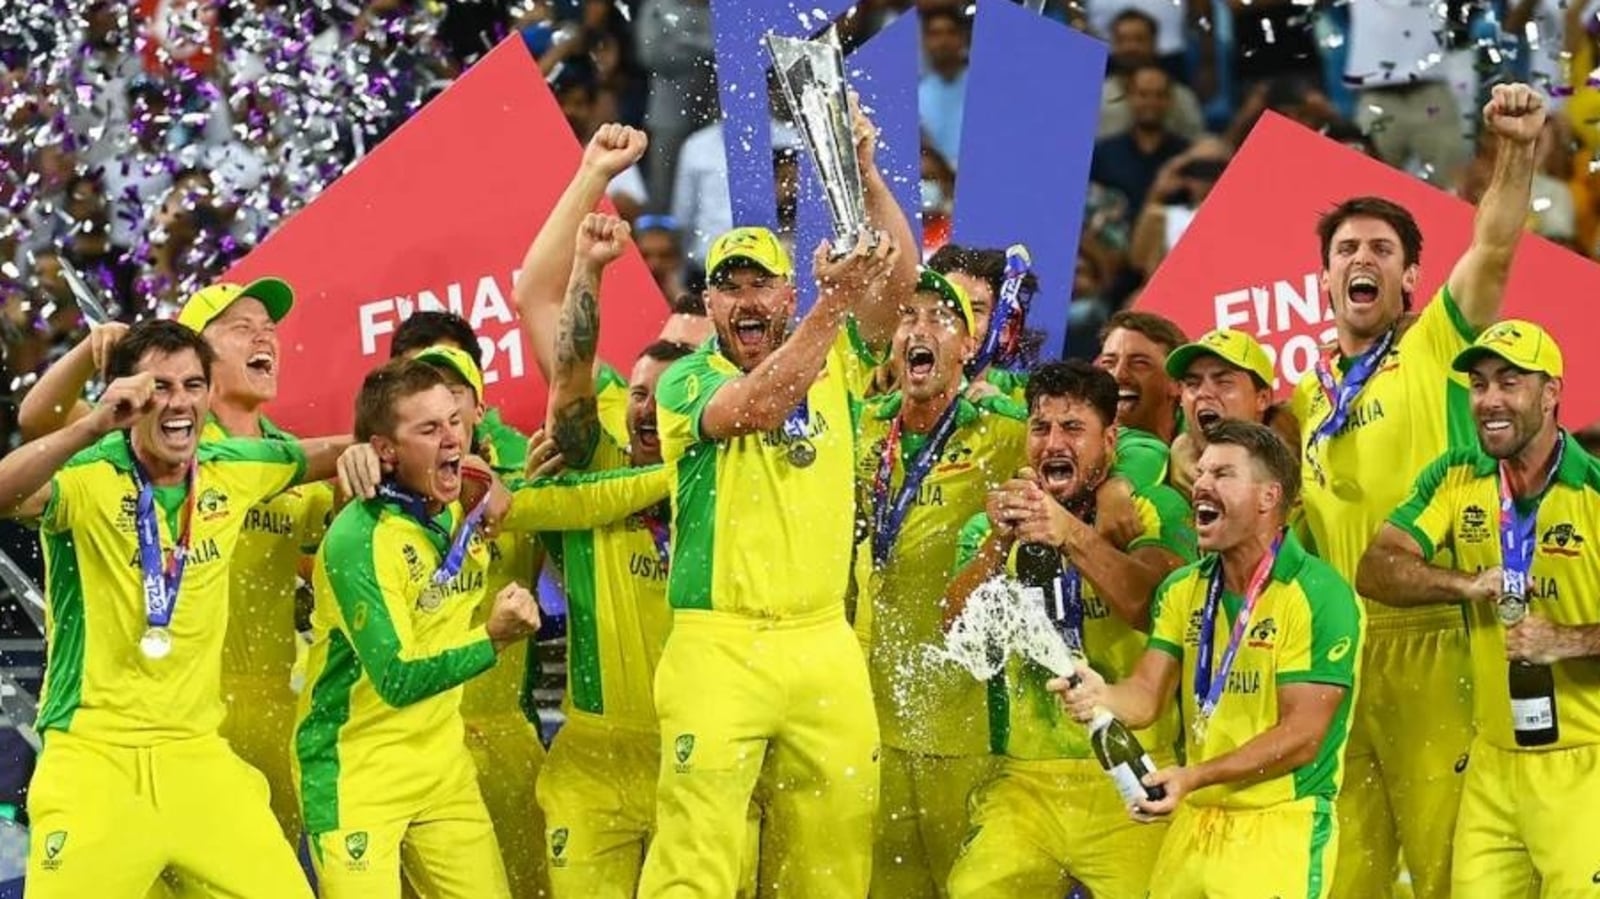 defending-champions-australia-reveal-new-jersey-for-t20-world-cup-at-home